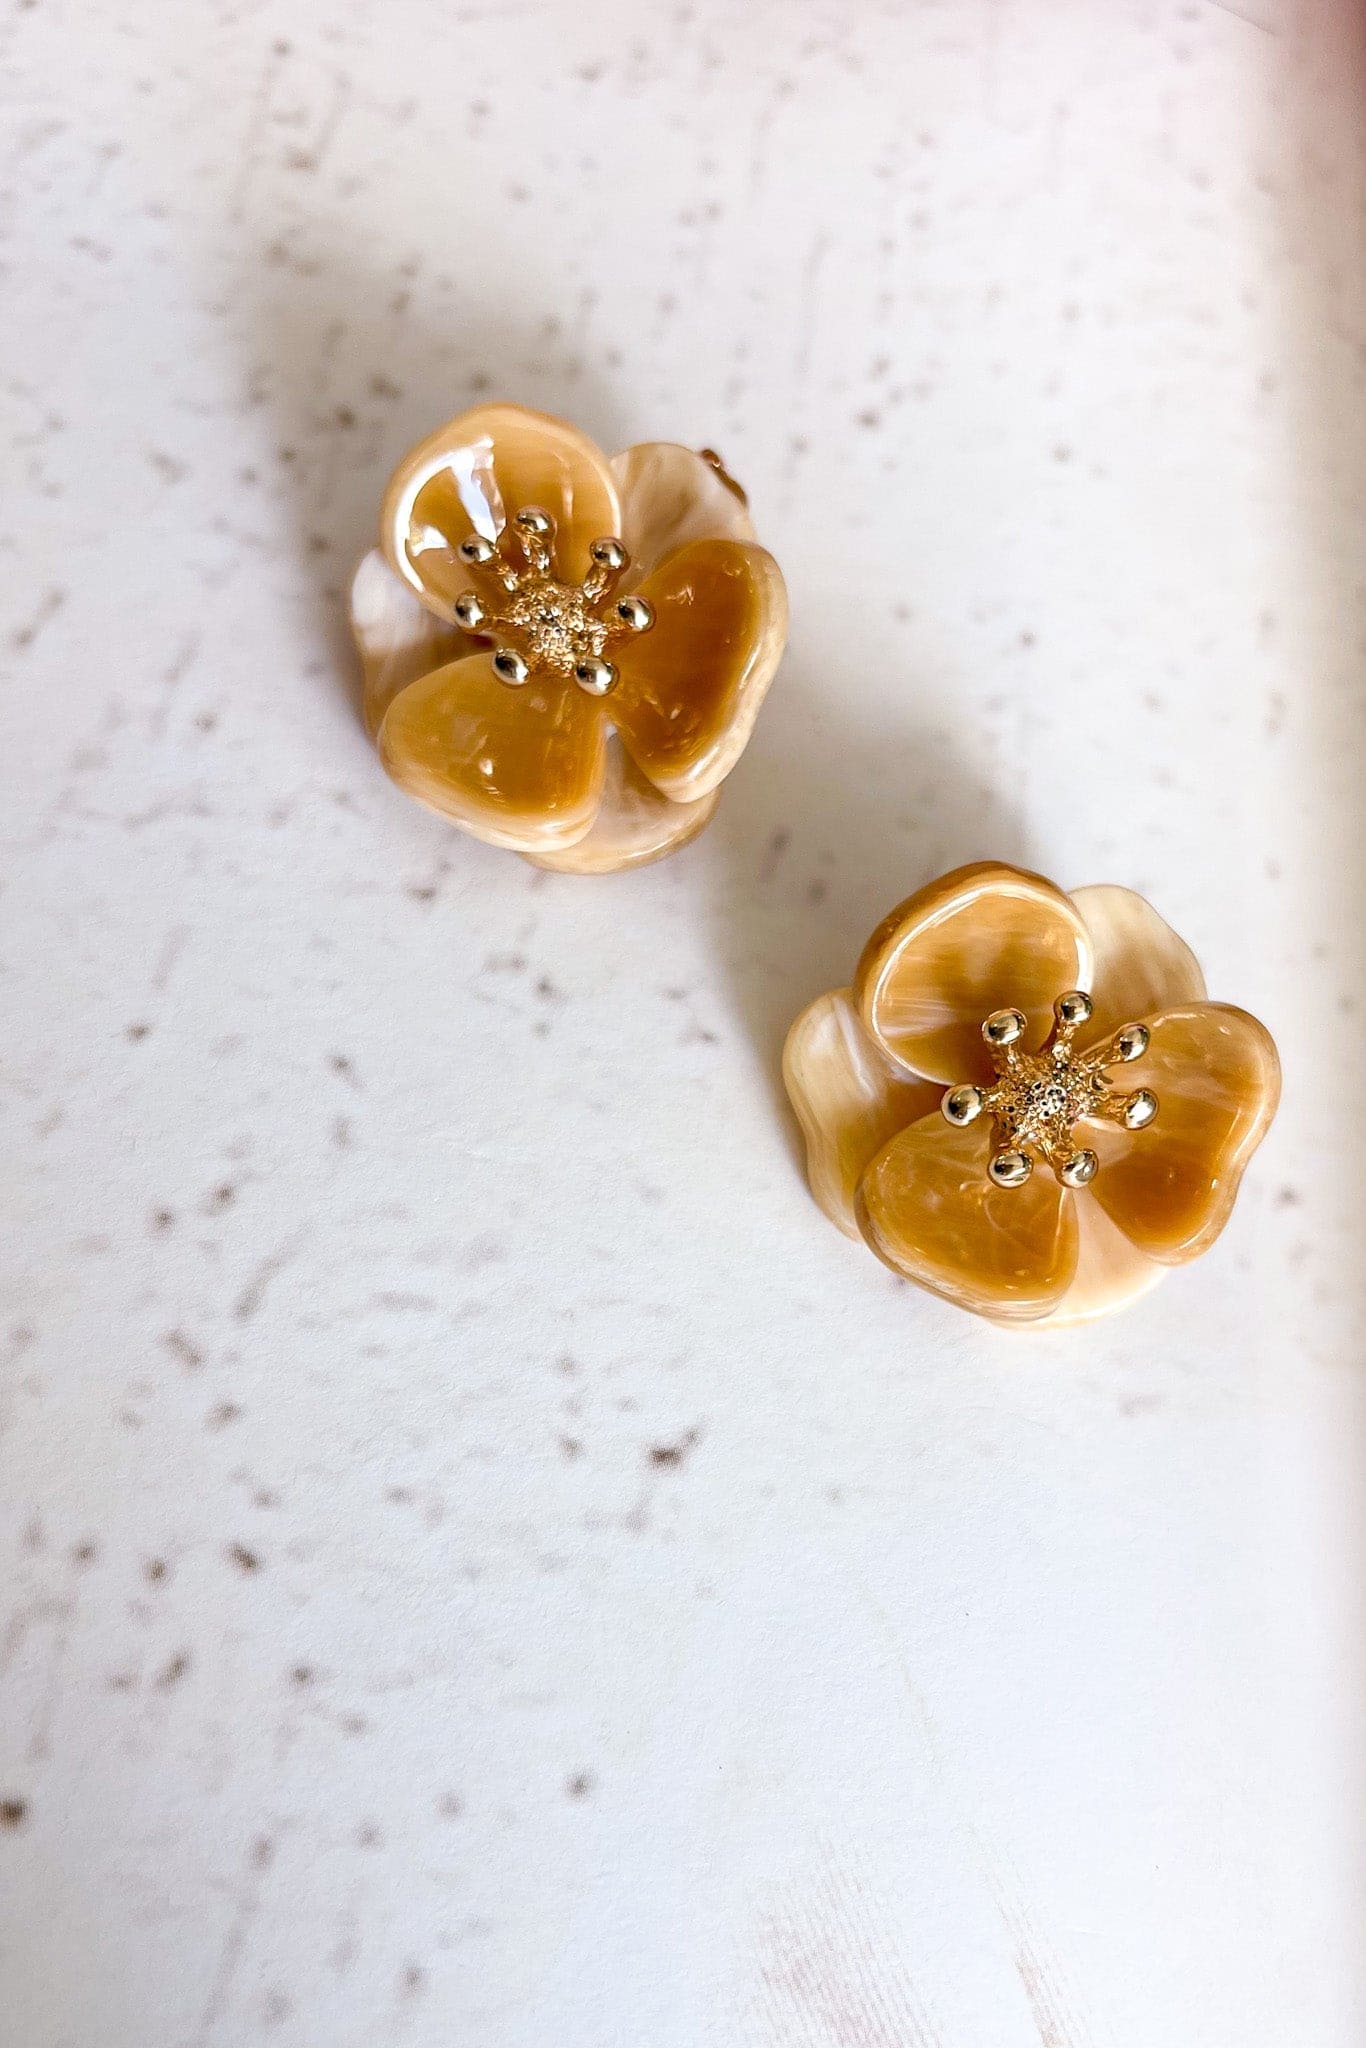 West Coast Earrings, ACCESSORIES, EARRINGS, GOLD, JEWELLERY, YELLOW, Our New West Coast Earrings Is Now Only $26.00 Exclusive At Mishkah, We Have The Latest Fashion Accessories @ Mishkah Online Fashion Boutique Our New West Coast Earrings is now only $26.00-MISHKAH